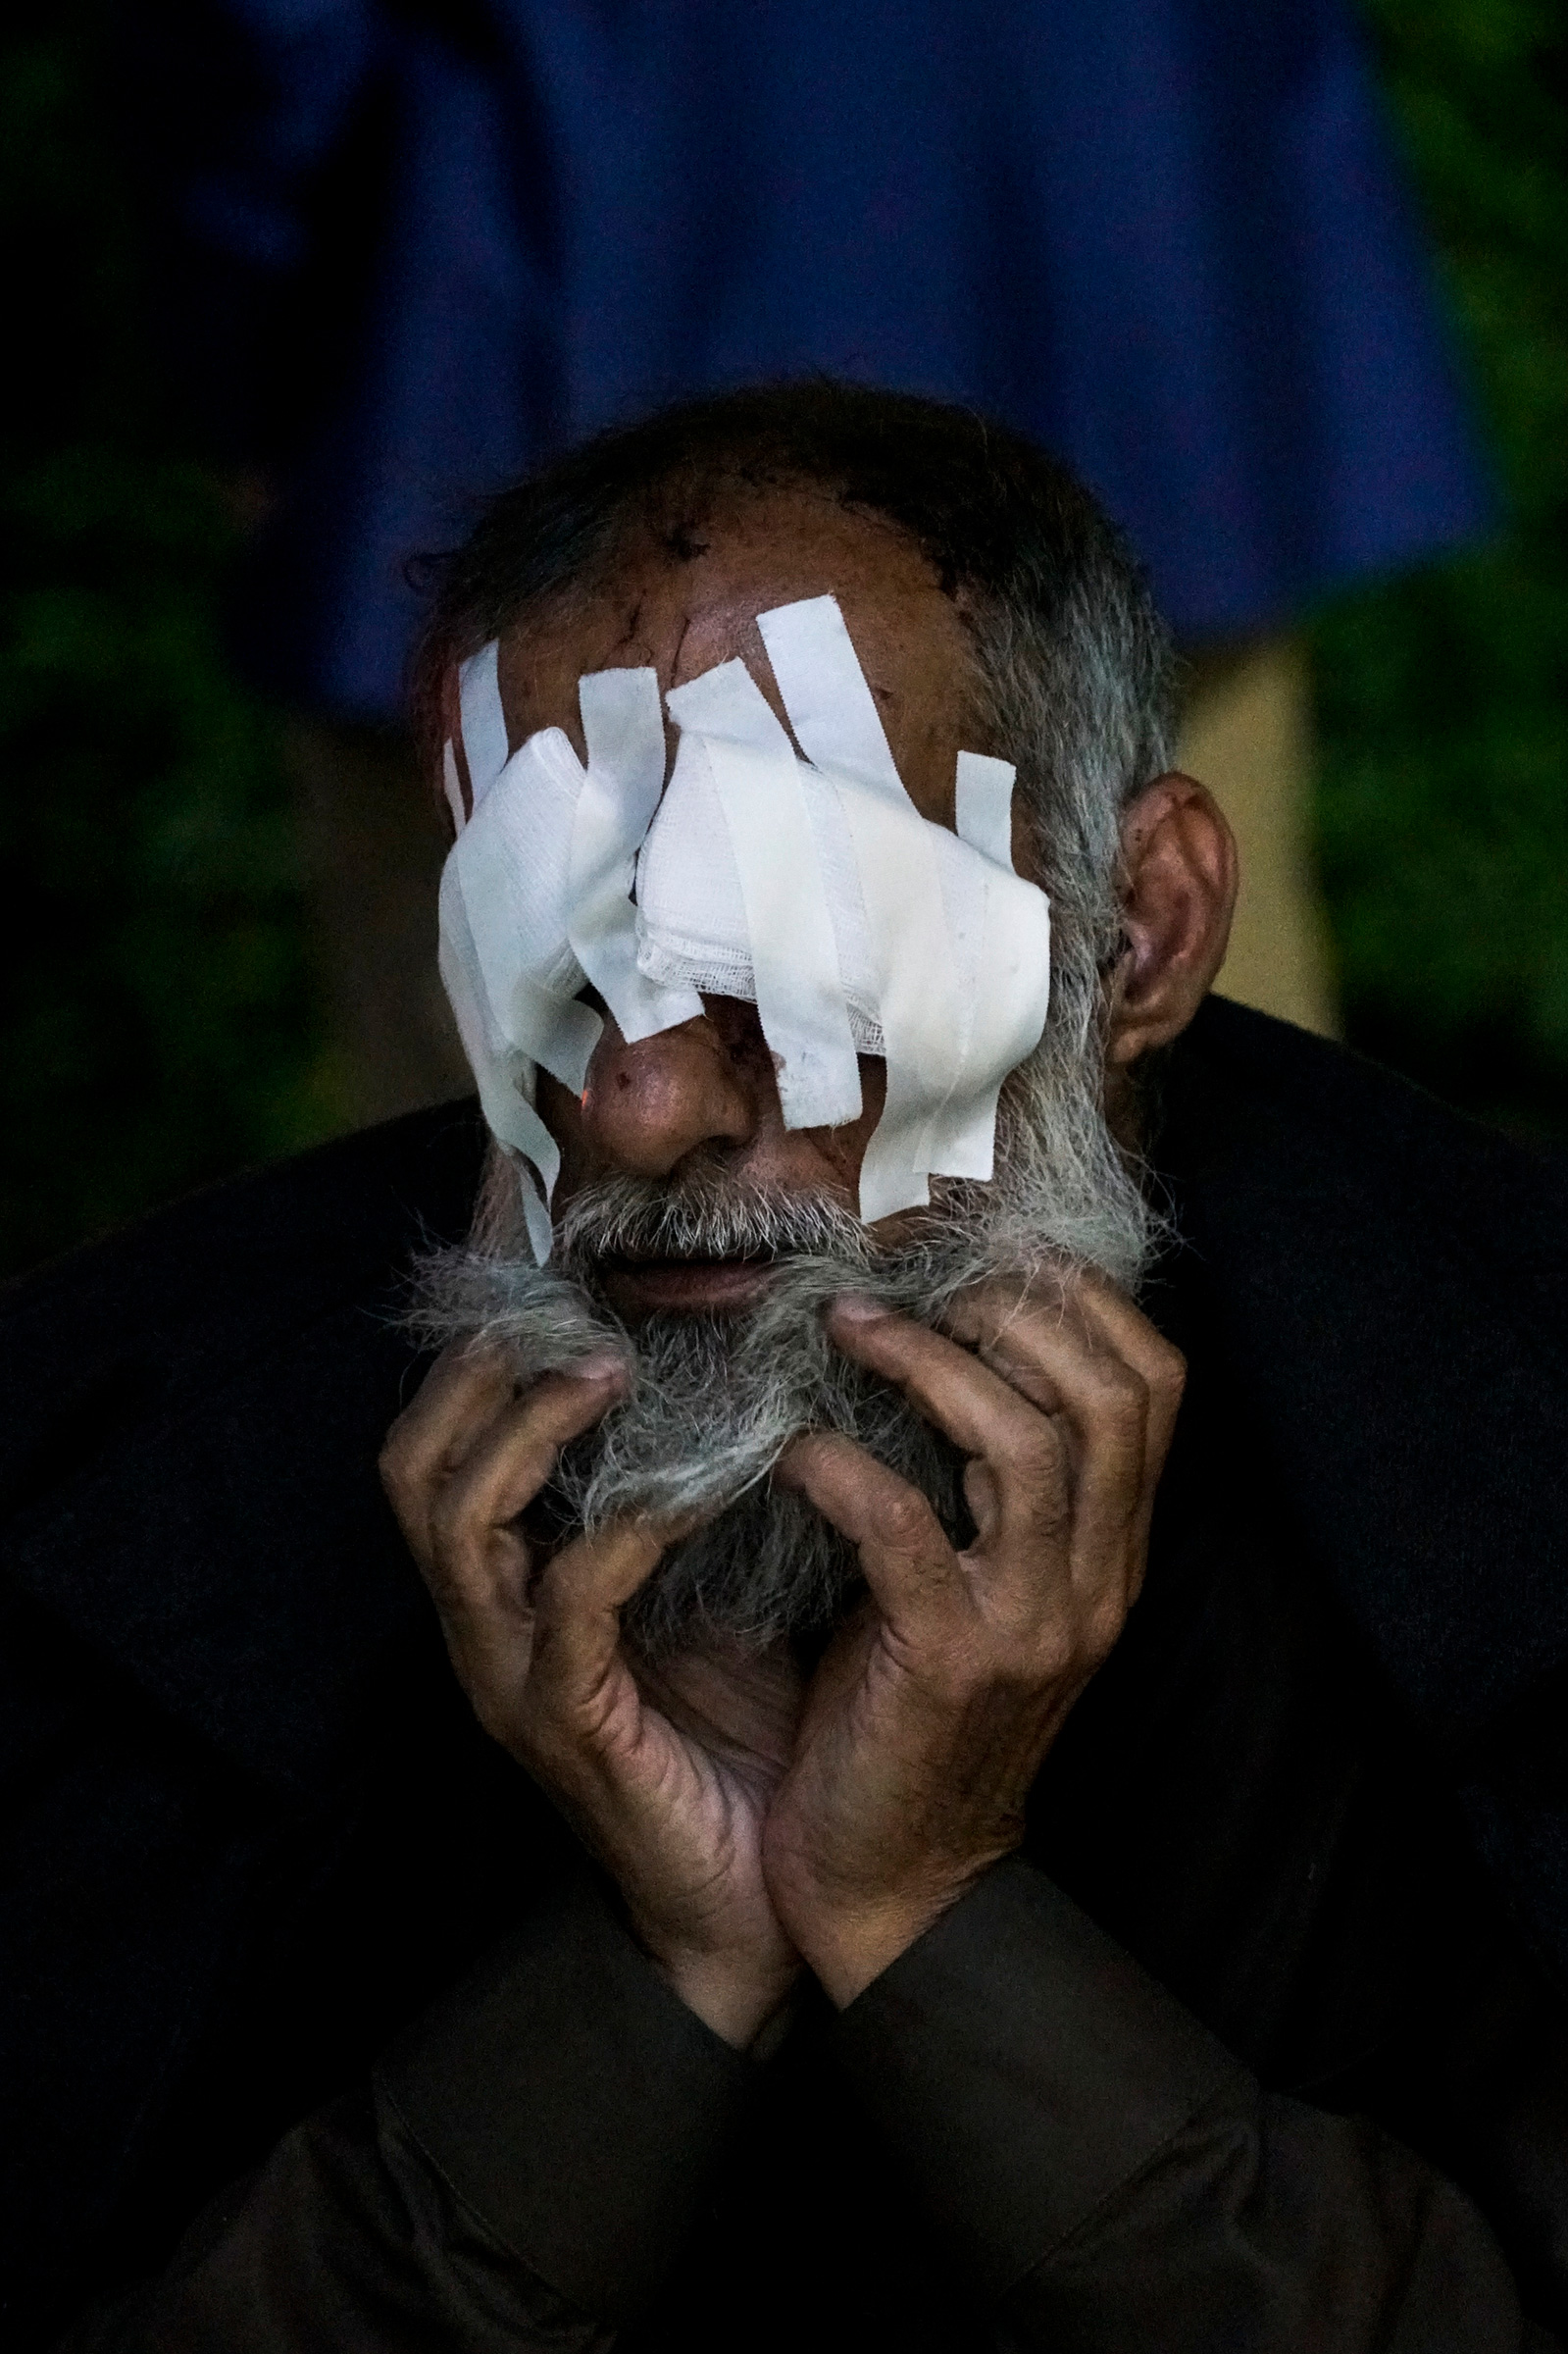 Adnan Thanon Younis, 53, was blinded by an exploding shell in Mosul and permanently lost his vision. It is estimated that 9,000–11,000 Iraqi civilians were killed in the battle of Mosul. Erbil, Iraq, 2017.